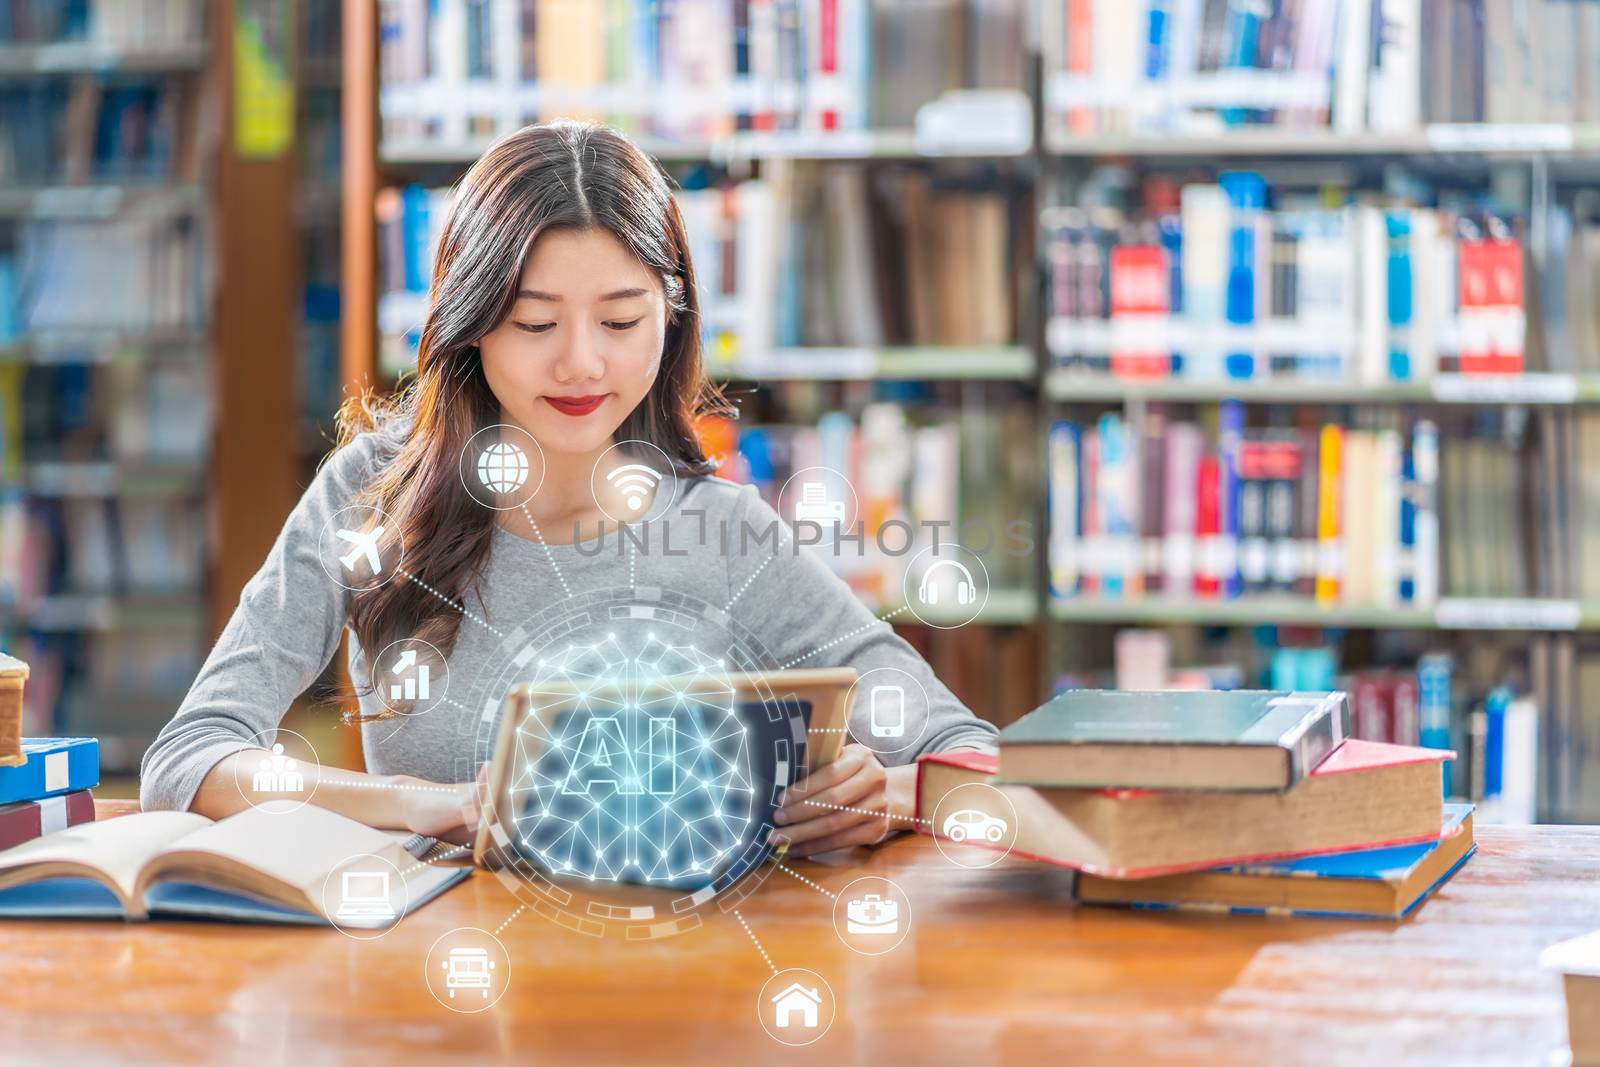 Polygonal brain shape of an artificial intelligence with various icon of smart city Internet of Things Technology over Asian young Student using technology tablet in library of university